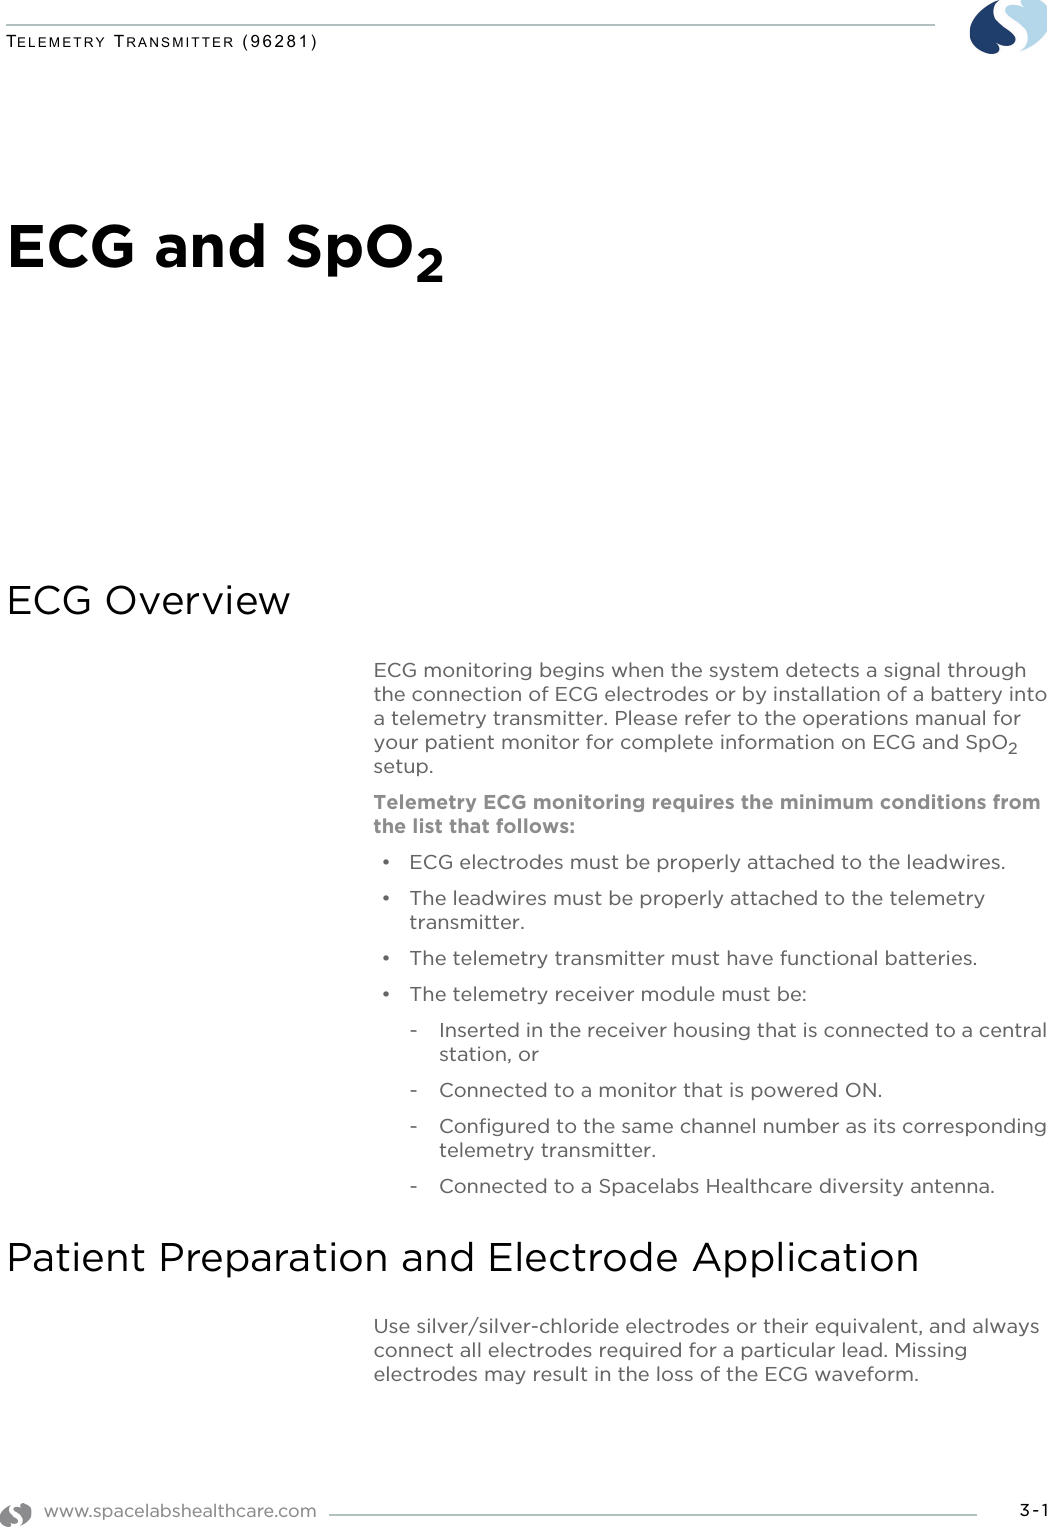 www.spacelabshealthcare.com 3-1TELEMETRY TRANSMITTER (96281)ECG and SpO2ECG OverviewECG monitoring begins when the system detects a signal through the connection of ECG electrodes or by installation of a battery into a telemetry transmitter. Please refer to the operations manual for your patient monitor for complete information on ECG and SpO2 setup.Telemetry ECG monitoring requires the minimum conditions from the list that follows:• ECG electrodes must be properly attached to the leadwires.• The leadwires must be properly attached to the telemetry transmitter.• The telemetry transmitter must have functional batteries.• The telemetry receiver module must be:- Inserted in the receiver housing that is connected to a central station, or- Connected to a monitor that is powered ON.- Configured to the same channel number as its corresponding telemetry transmitter. - Connected to a Spacelabs Healthcare diversity antenna.Patient Preparation and Electrode ApplicationUse silver/silver-chloride electrodes or their equivalent, and always connect all electrodes required for a particular lead. Missing electrodes may result in the loss of the ECG waveform.